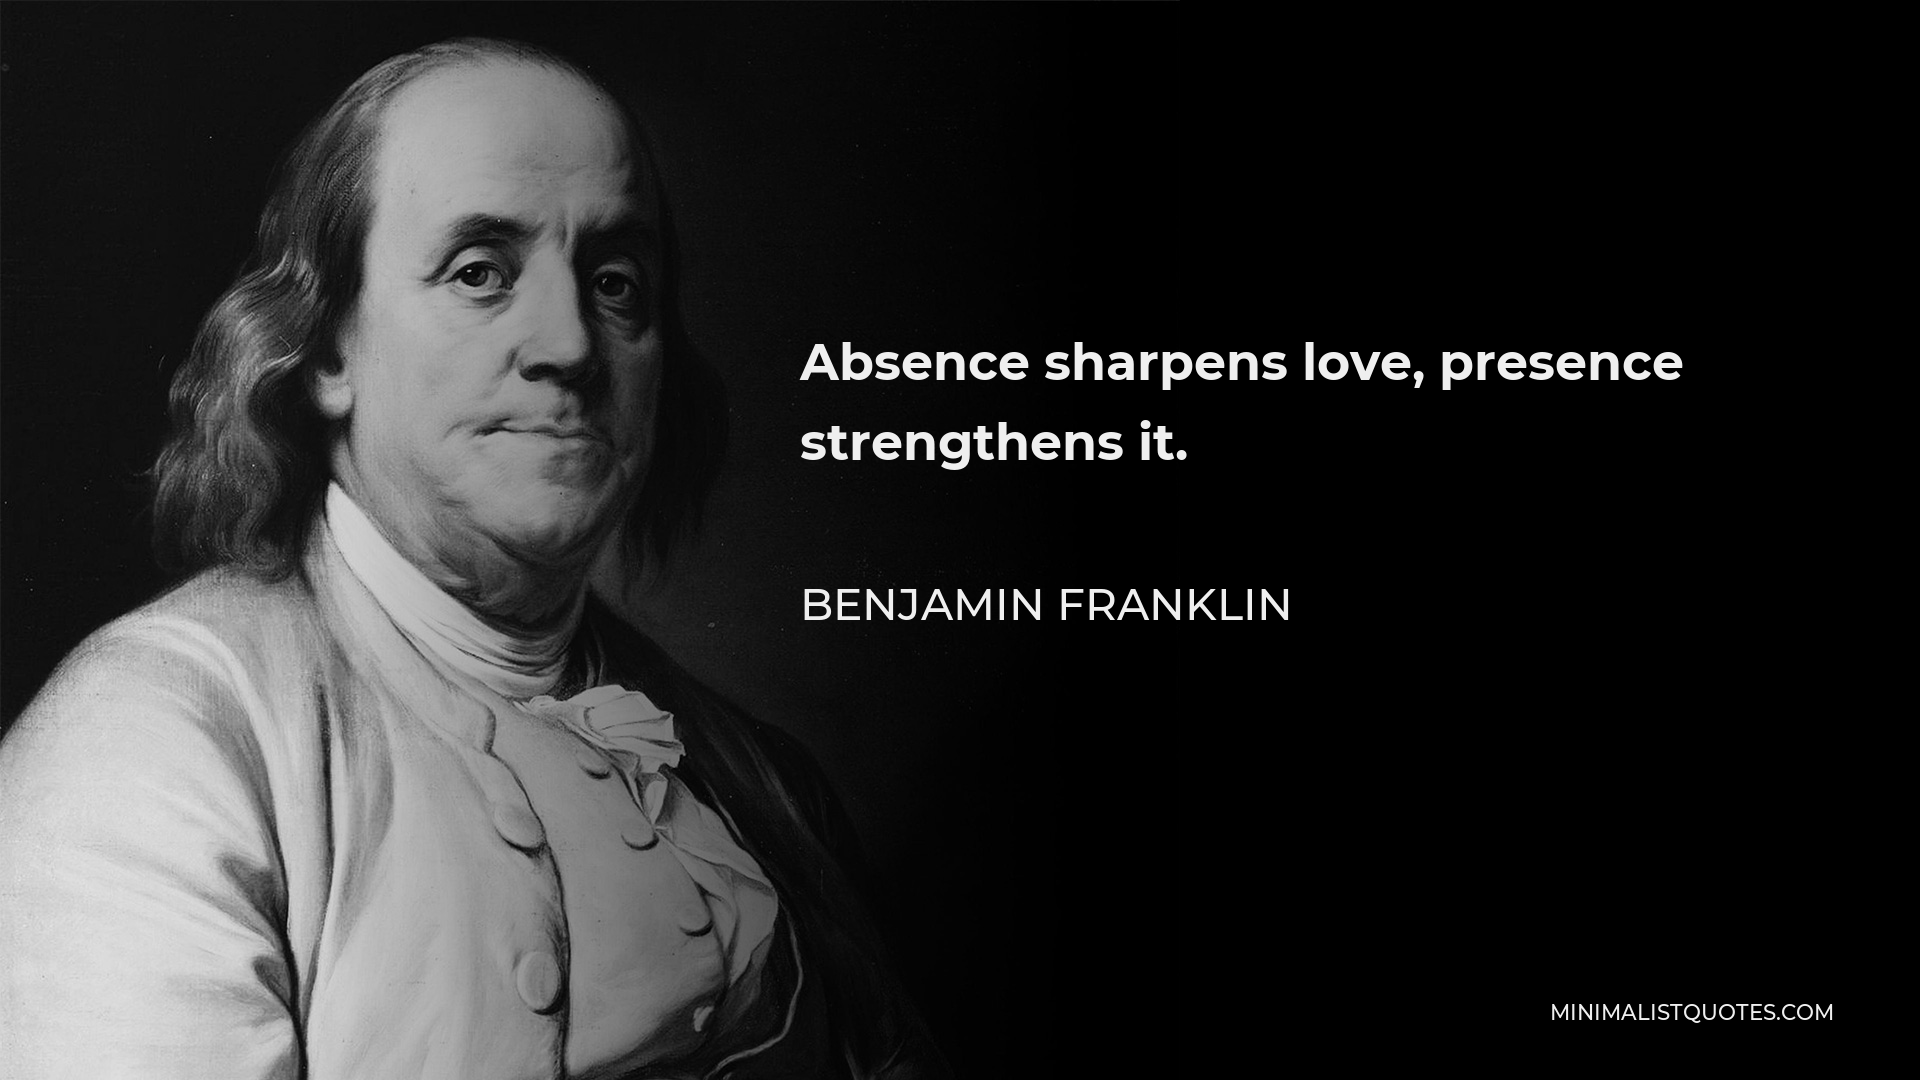 Benjamin Franklin Quote - Absence sharpens love, presence strengthens it.